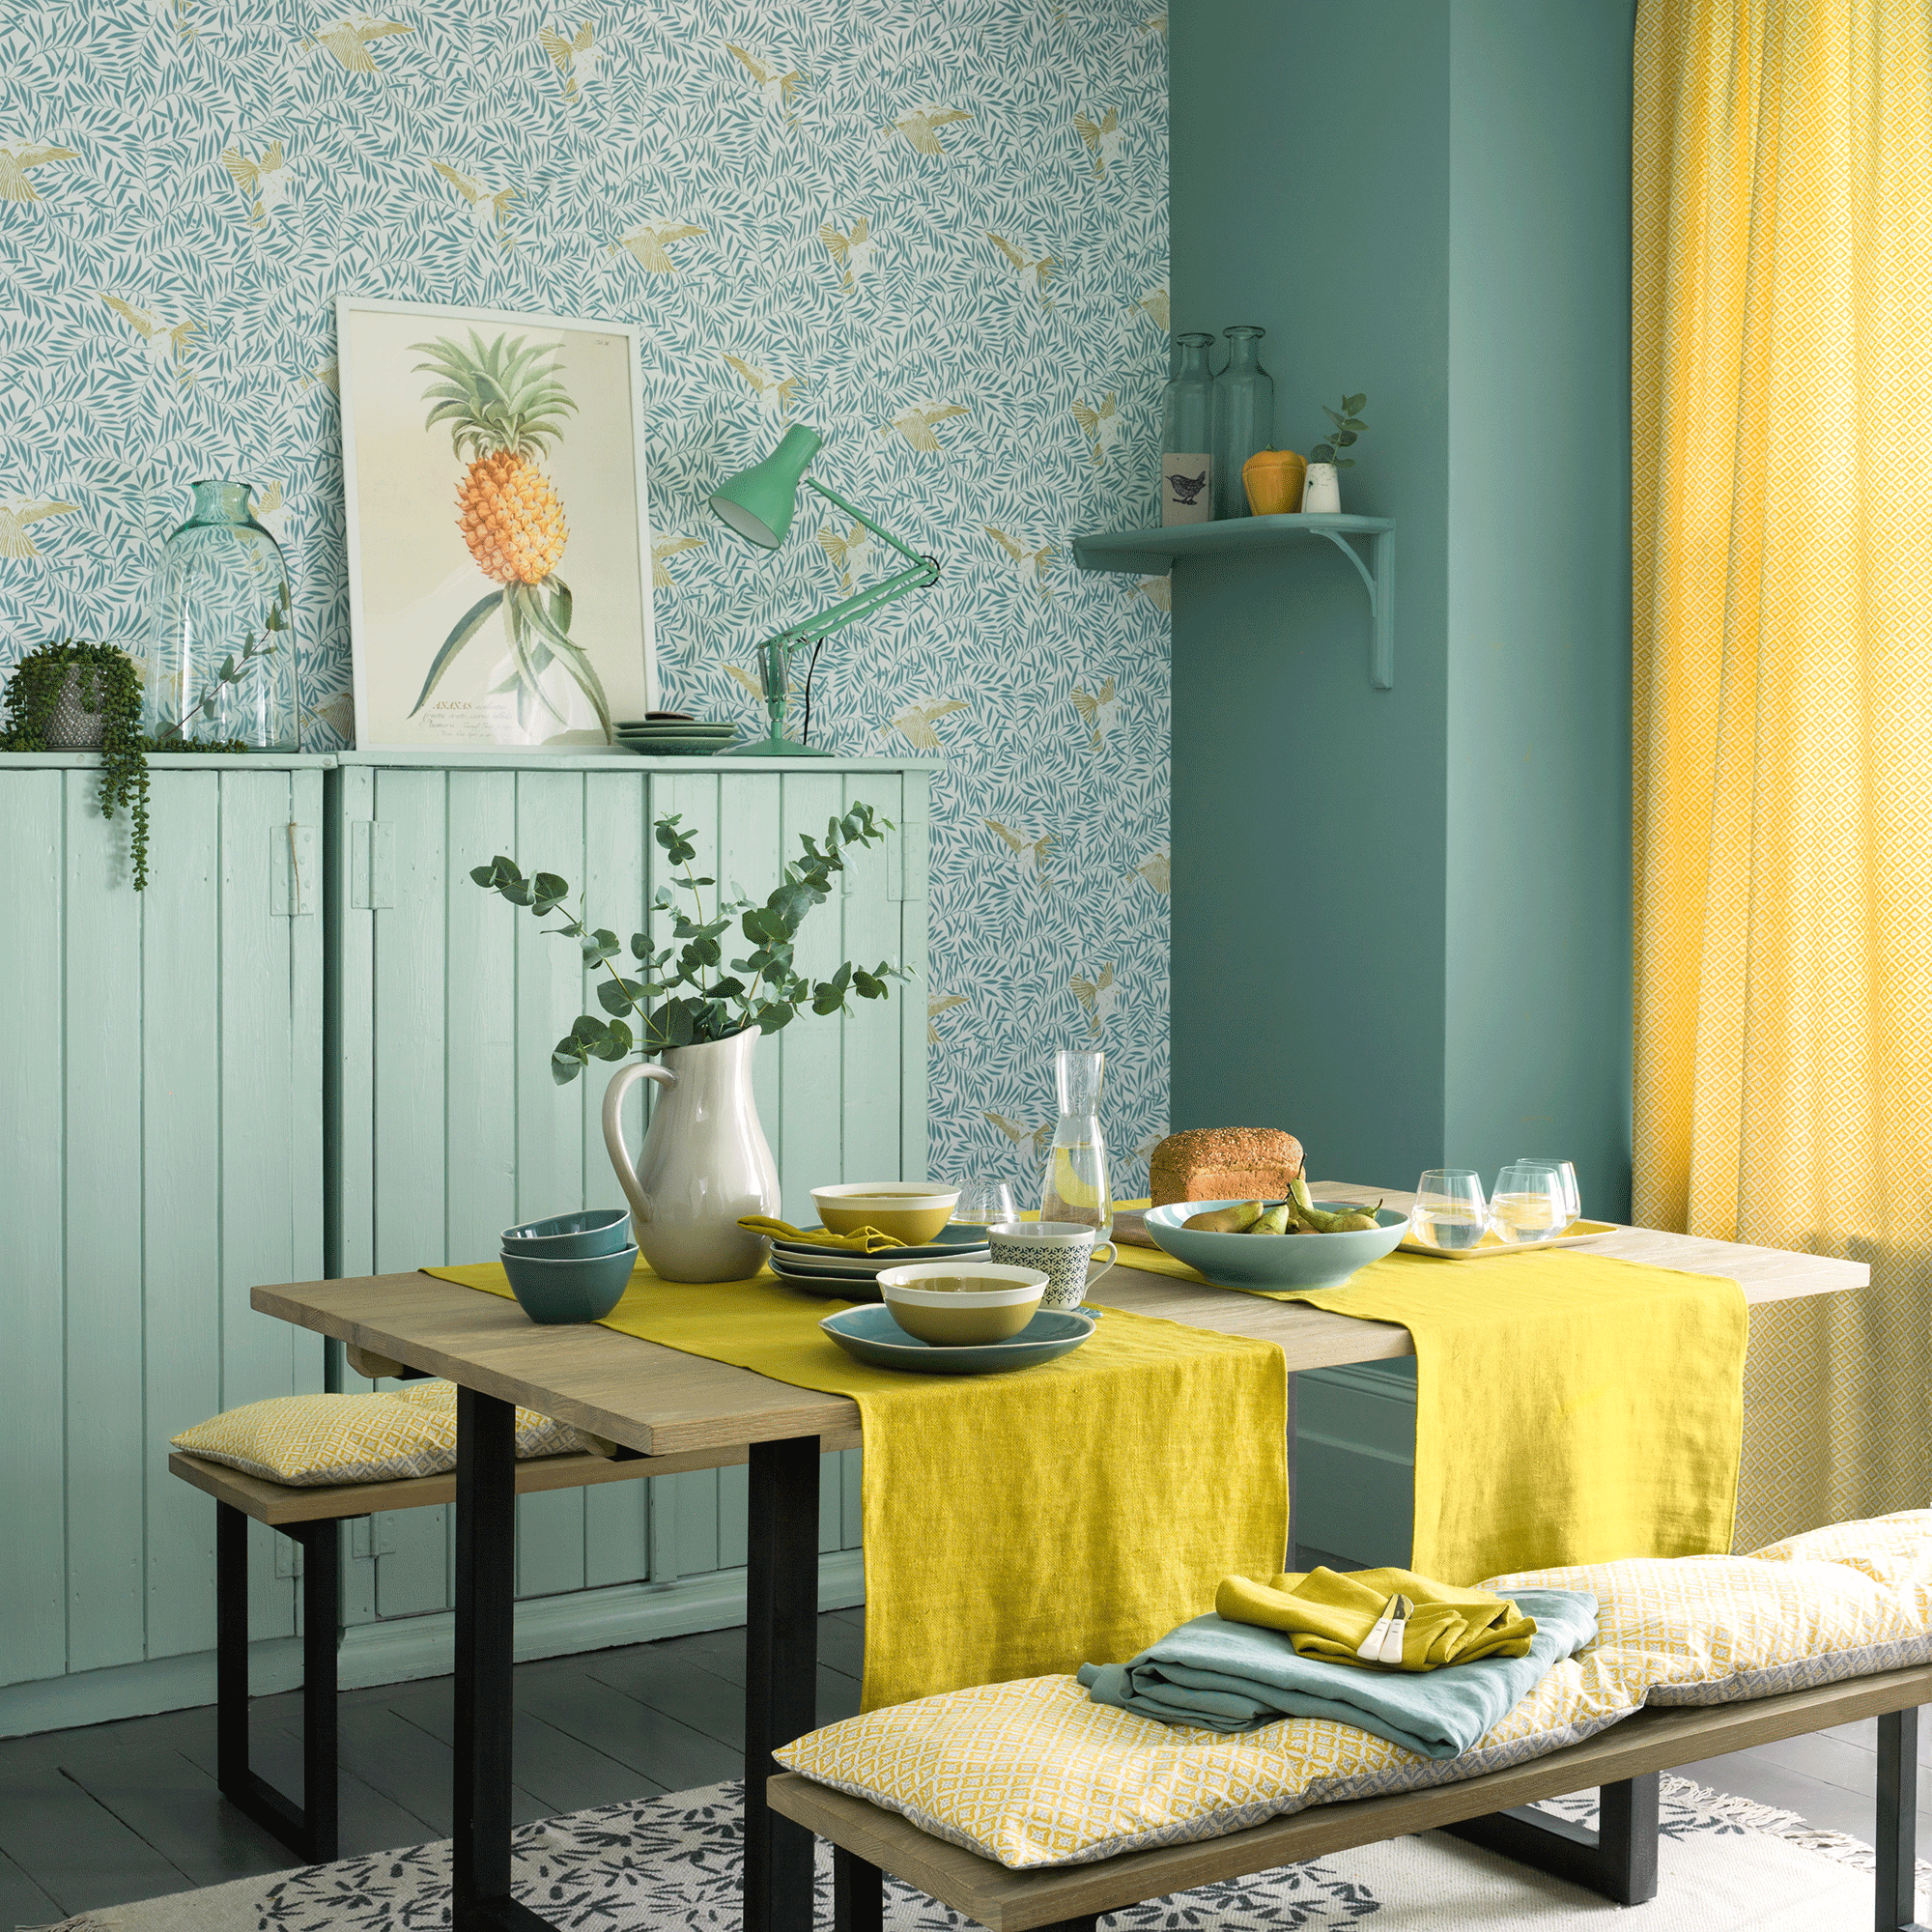 Dining room colour schemes – create your perfect dining space using the latest on-trend colours